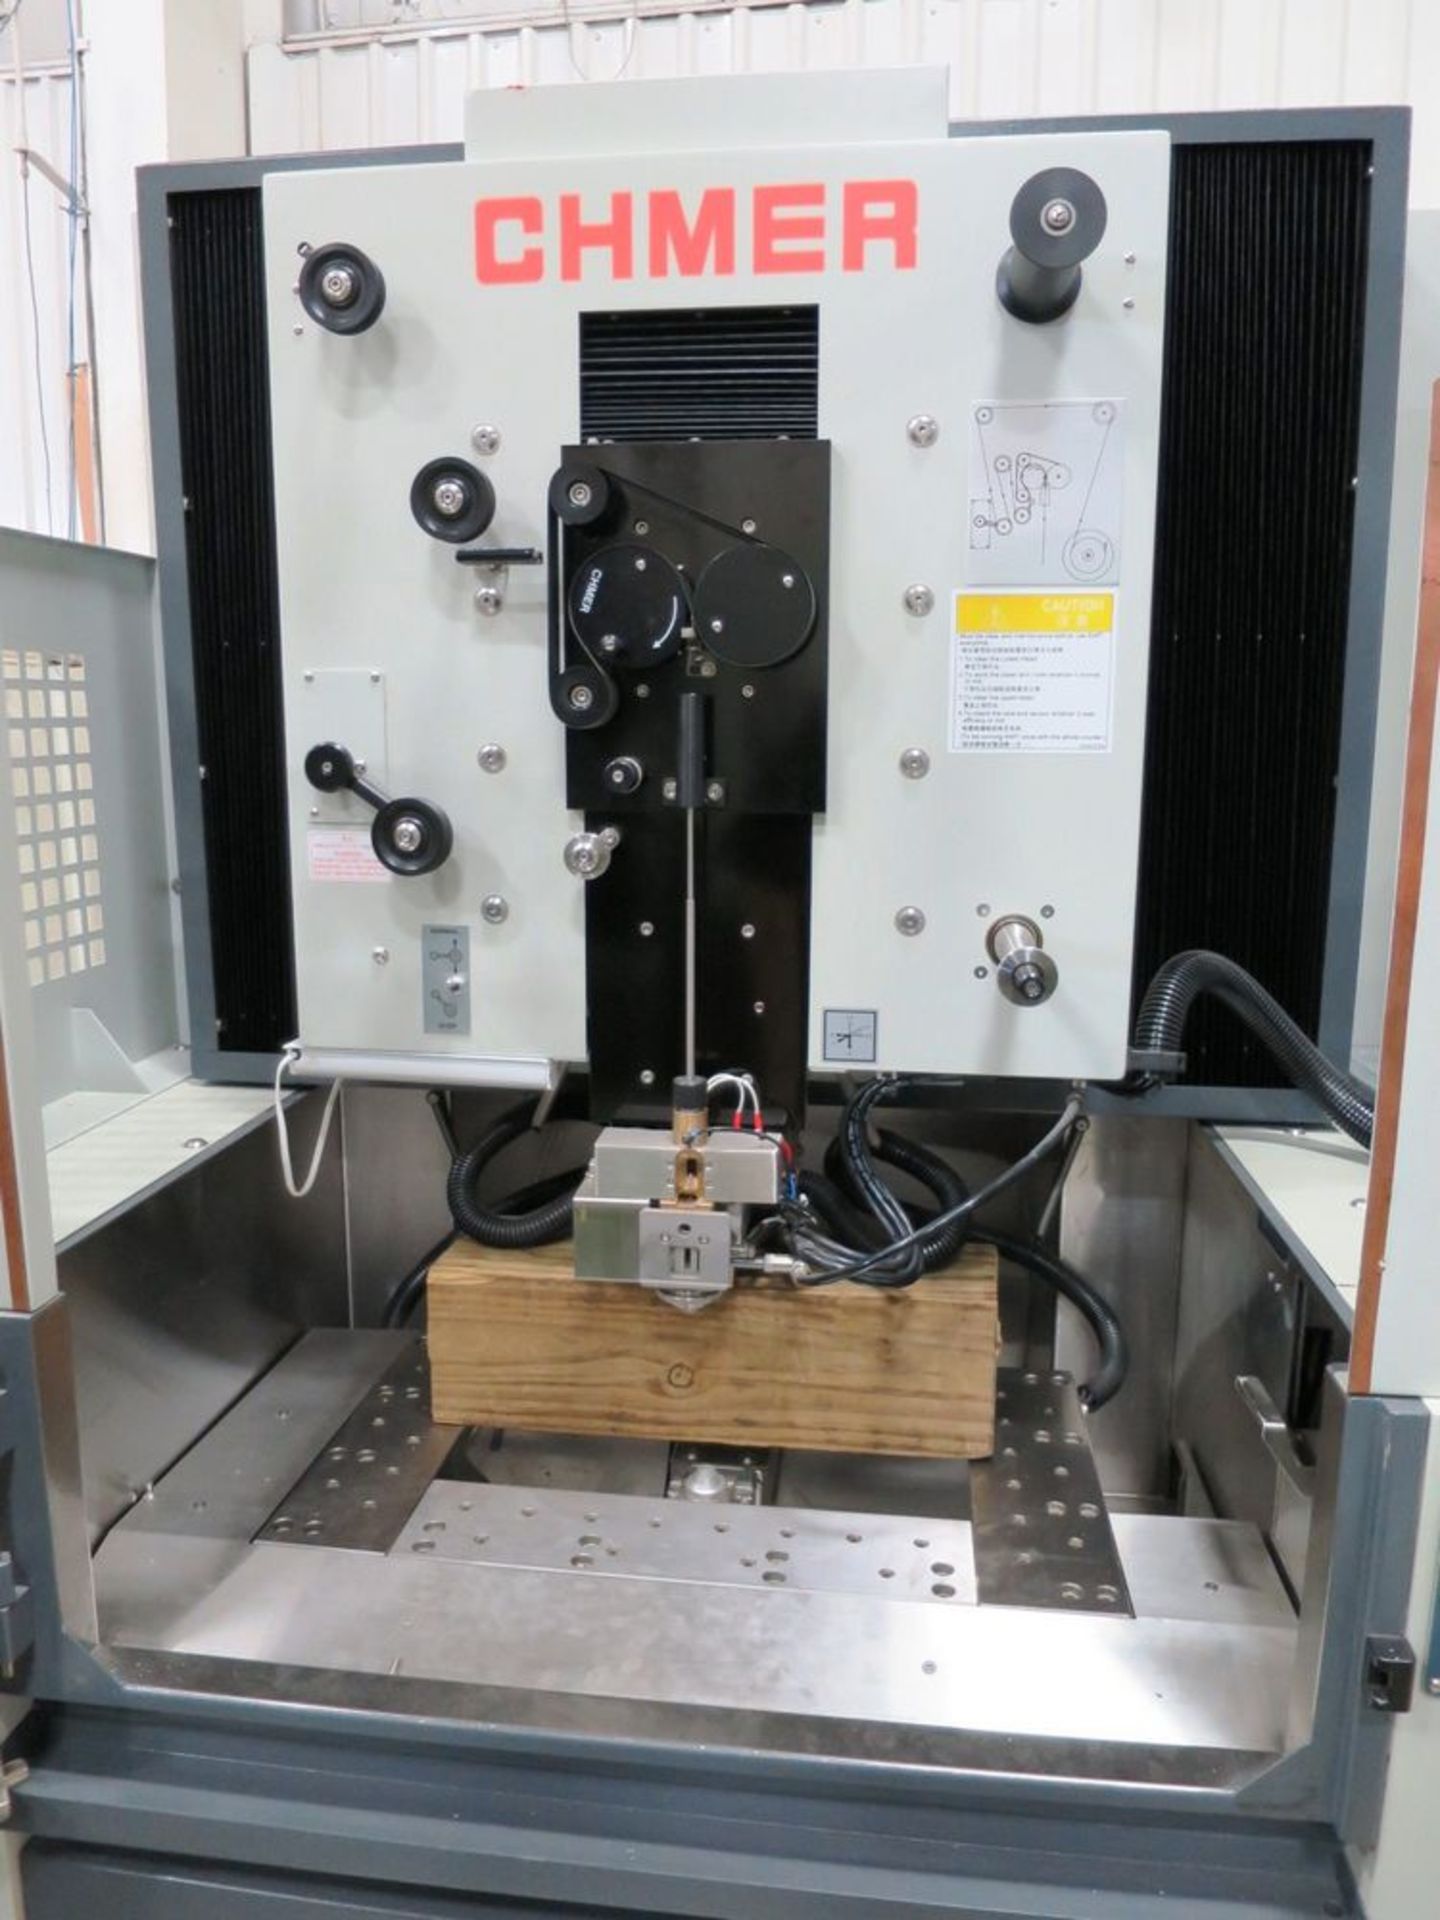 Chmer A422SL CNC Wire EDM Machine "NEW and Un-Used", S/N 1110693, New 2012 General Specifications, - Image 3 of 25